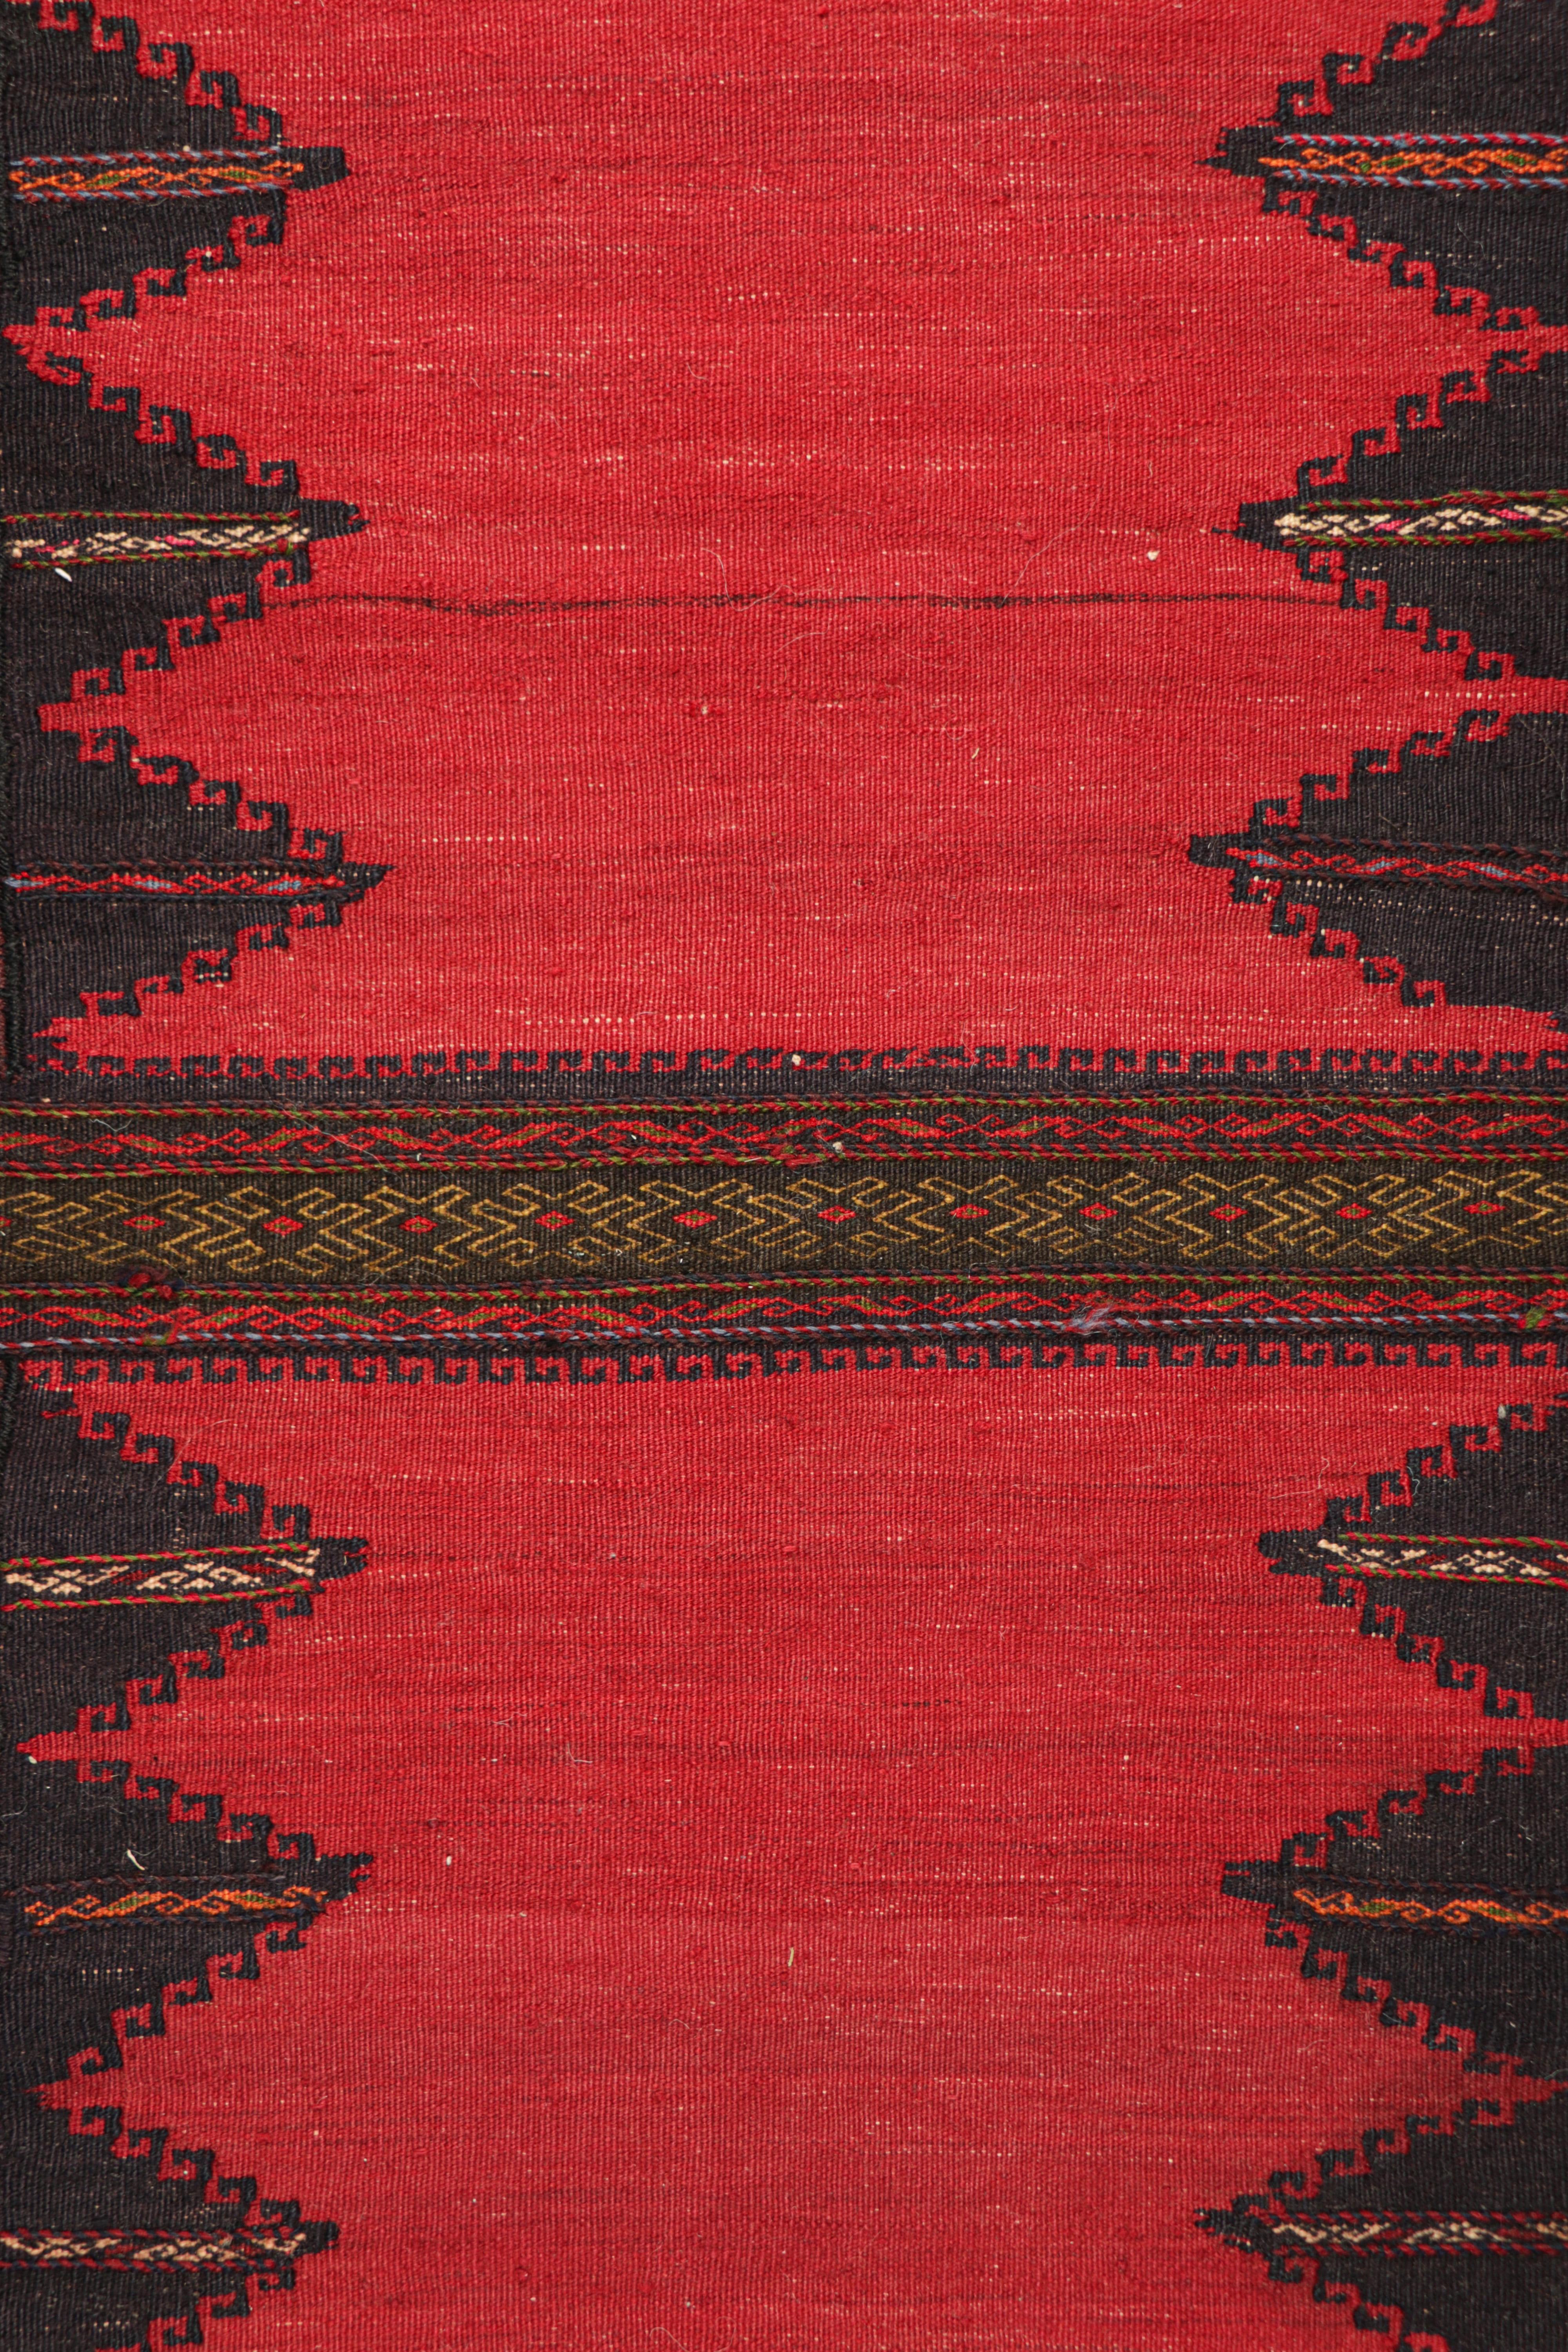 Handwoven in wool, circa 1950-1960, this 2×4 vintage Afghan tribal kilim, is a collectible tribal piece that may have been used as table covers in nomadic daily life, much similar to Persian Sofreh Kilims.

On the Design: 

Drawing on Afghan tribal